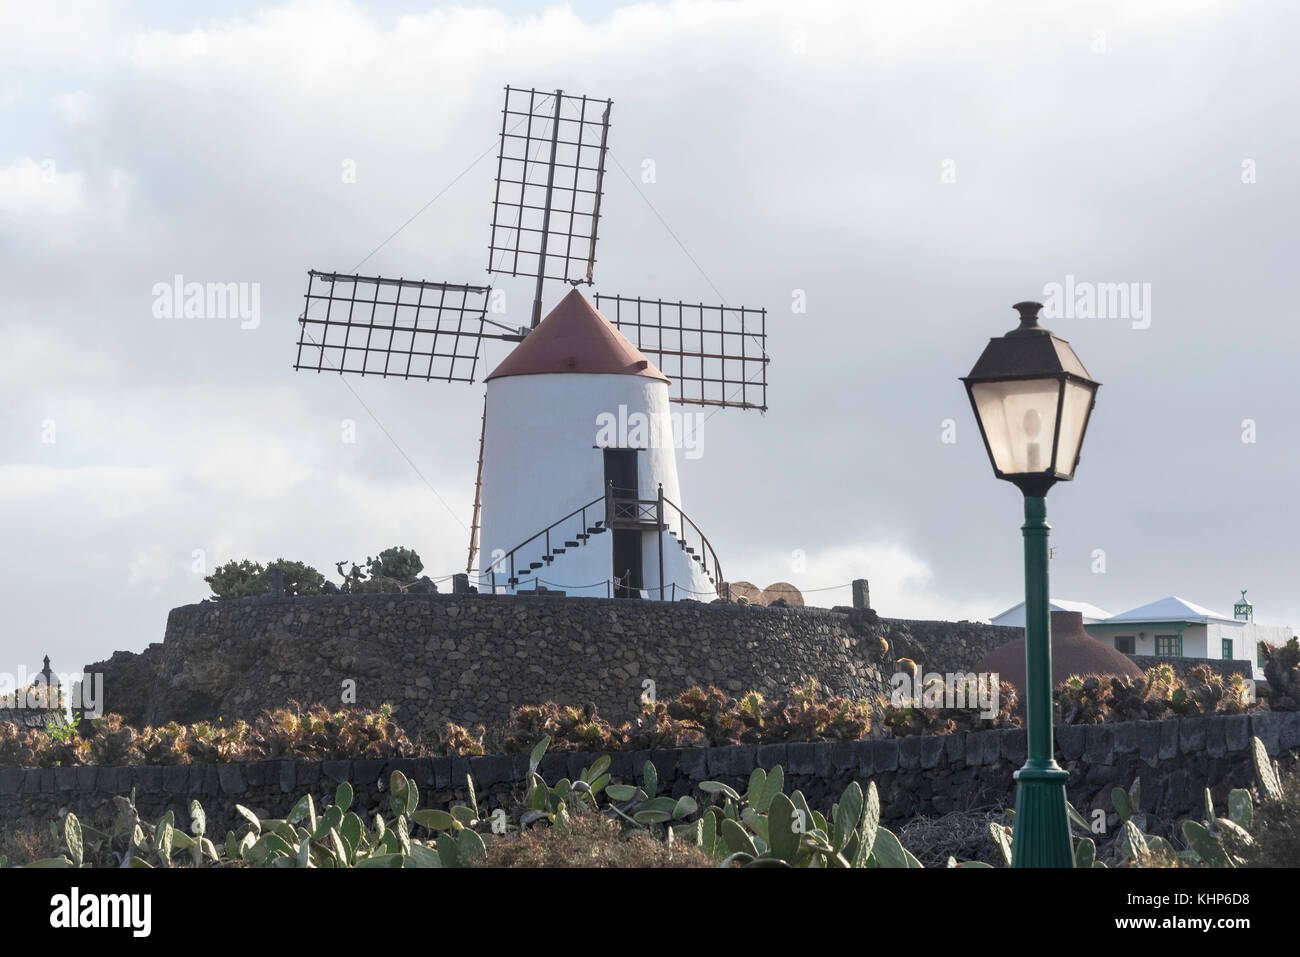 Windmill at the Cactus Garden visitor attraction in Lanzarote, Canary Islands. Stock Photo